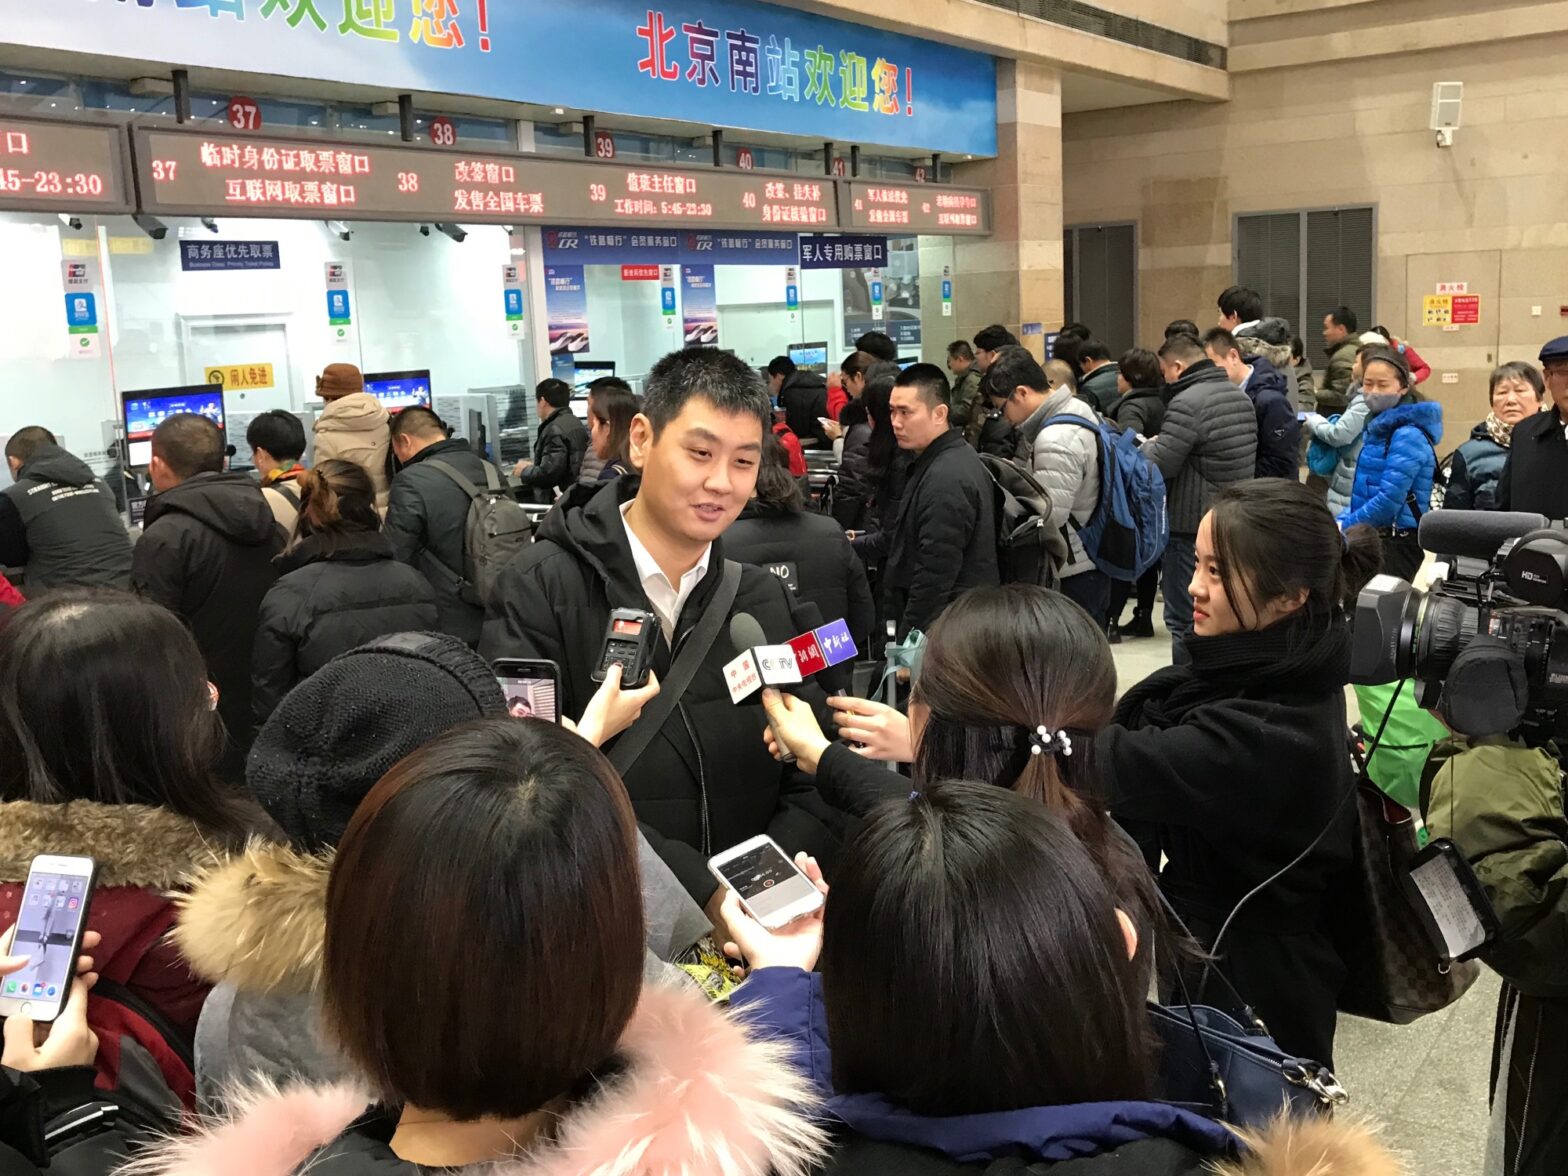 An image of David Feng being surrounded by members of the media